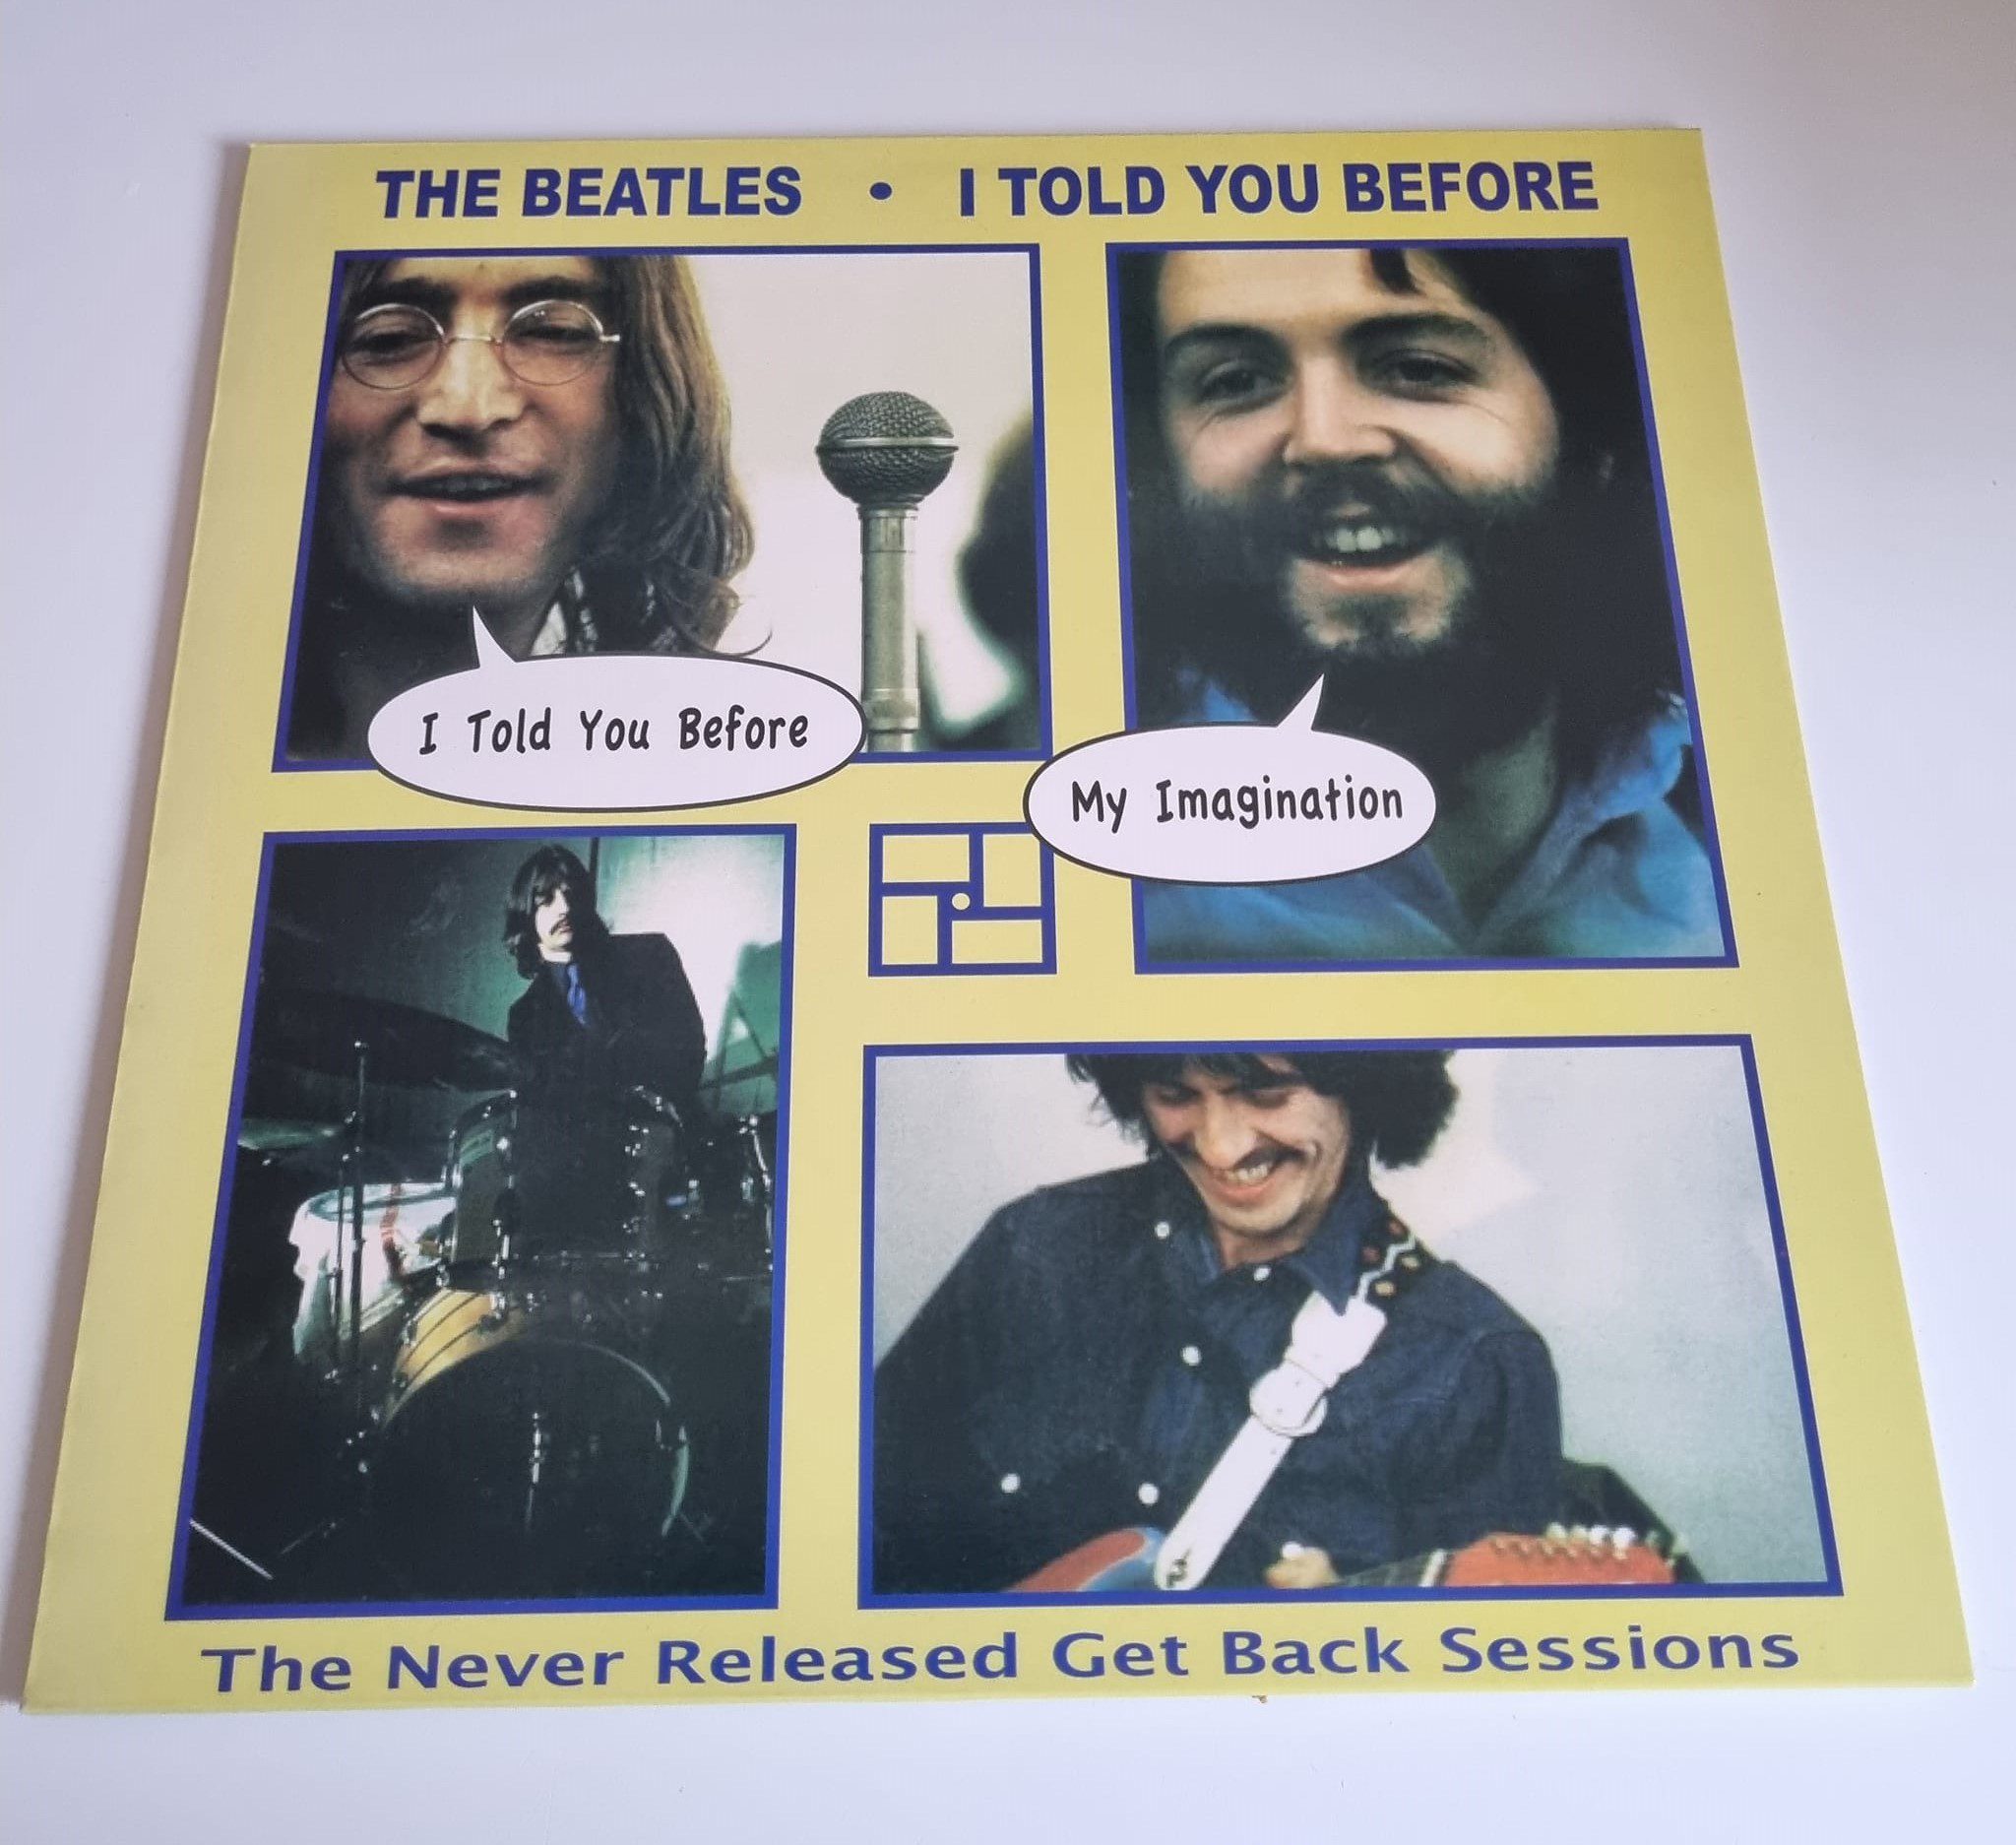 Buy this rare Beatles record by clicking here